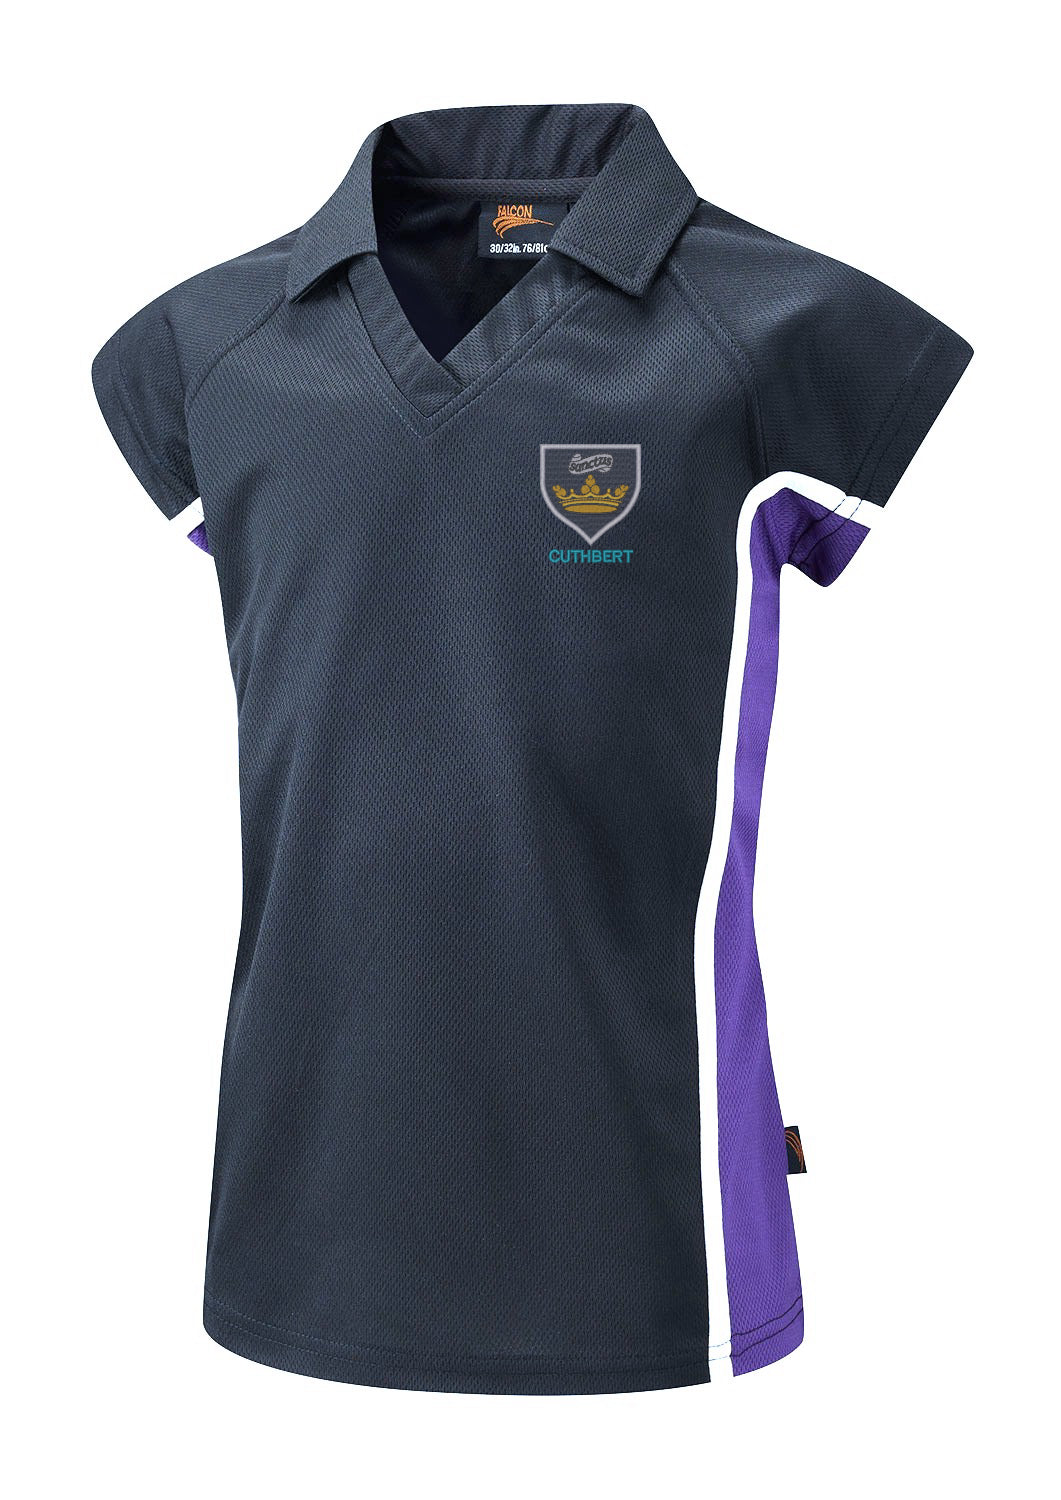 All Saints Navy, Purple And White Girls Sports Polo House Cuthbert